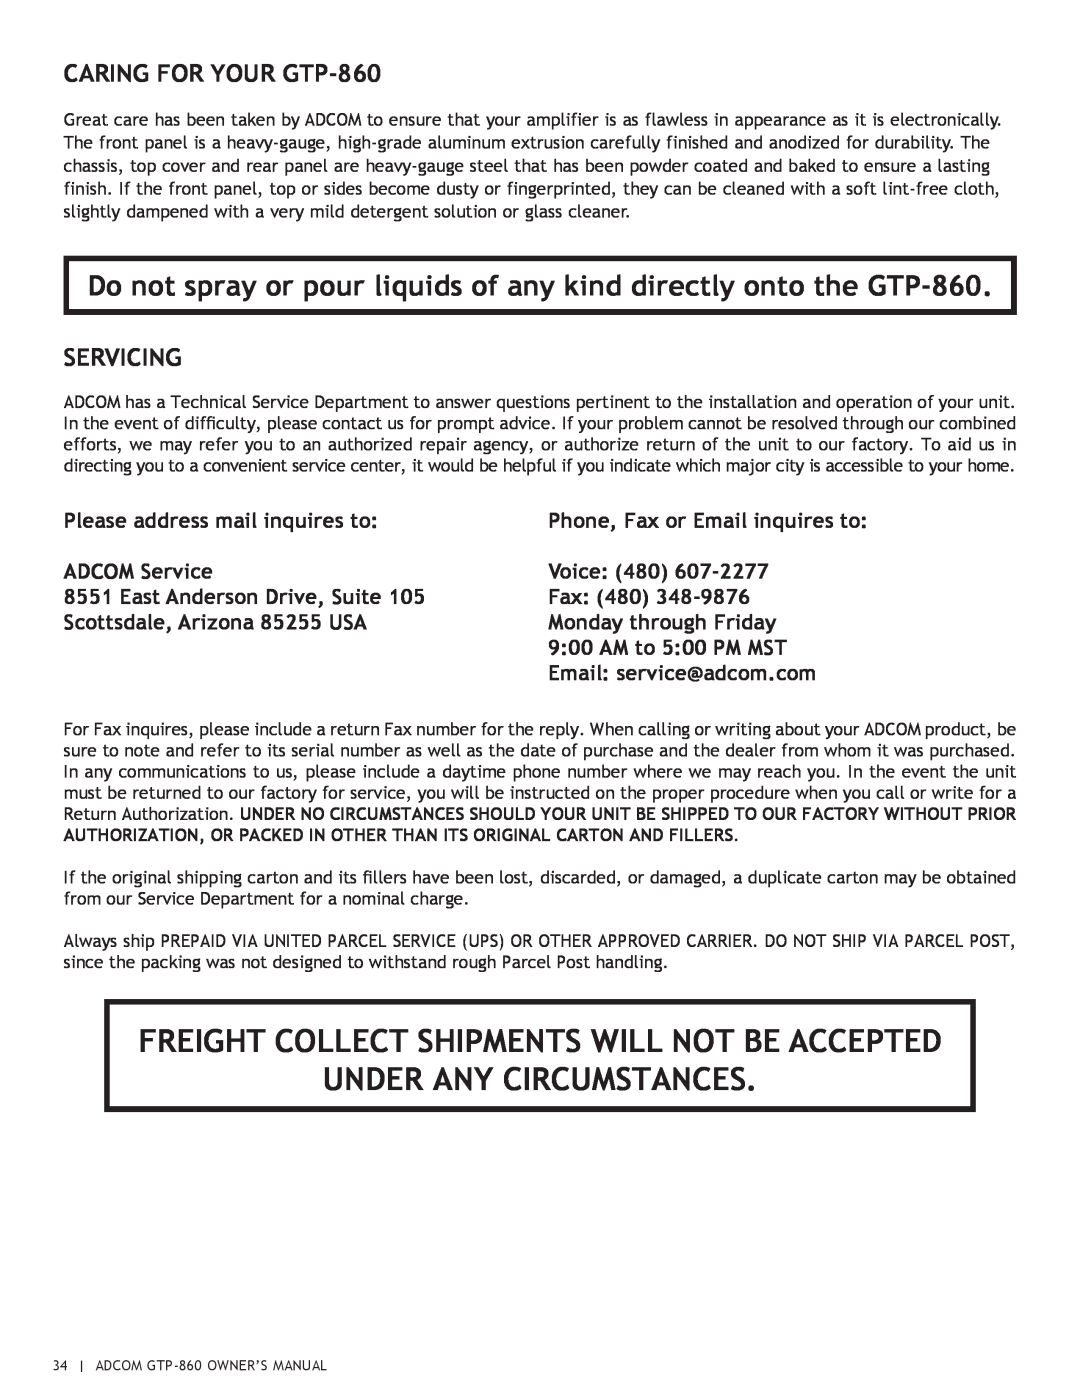 Adcom Freight Collect Shipments Will Not Be Accepted, Under Any Circumstances, CARING FOR YOUR GTP-860, Servicing 